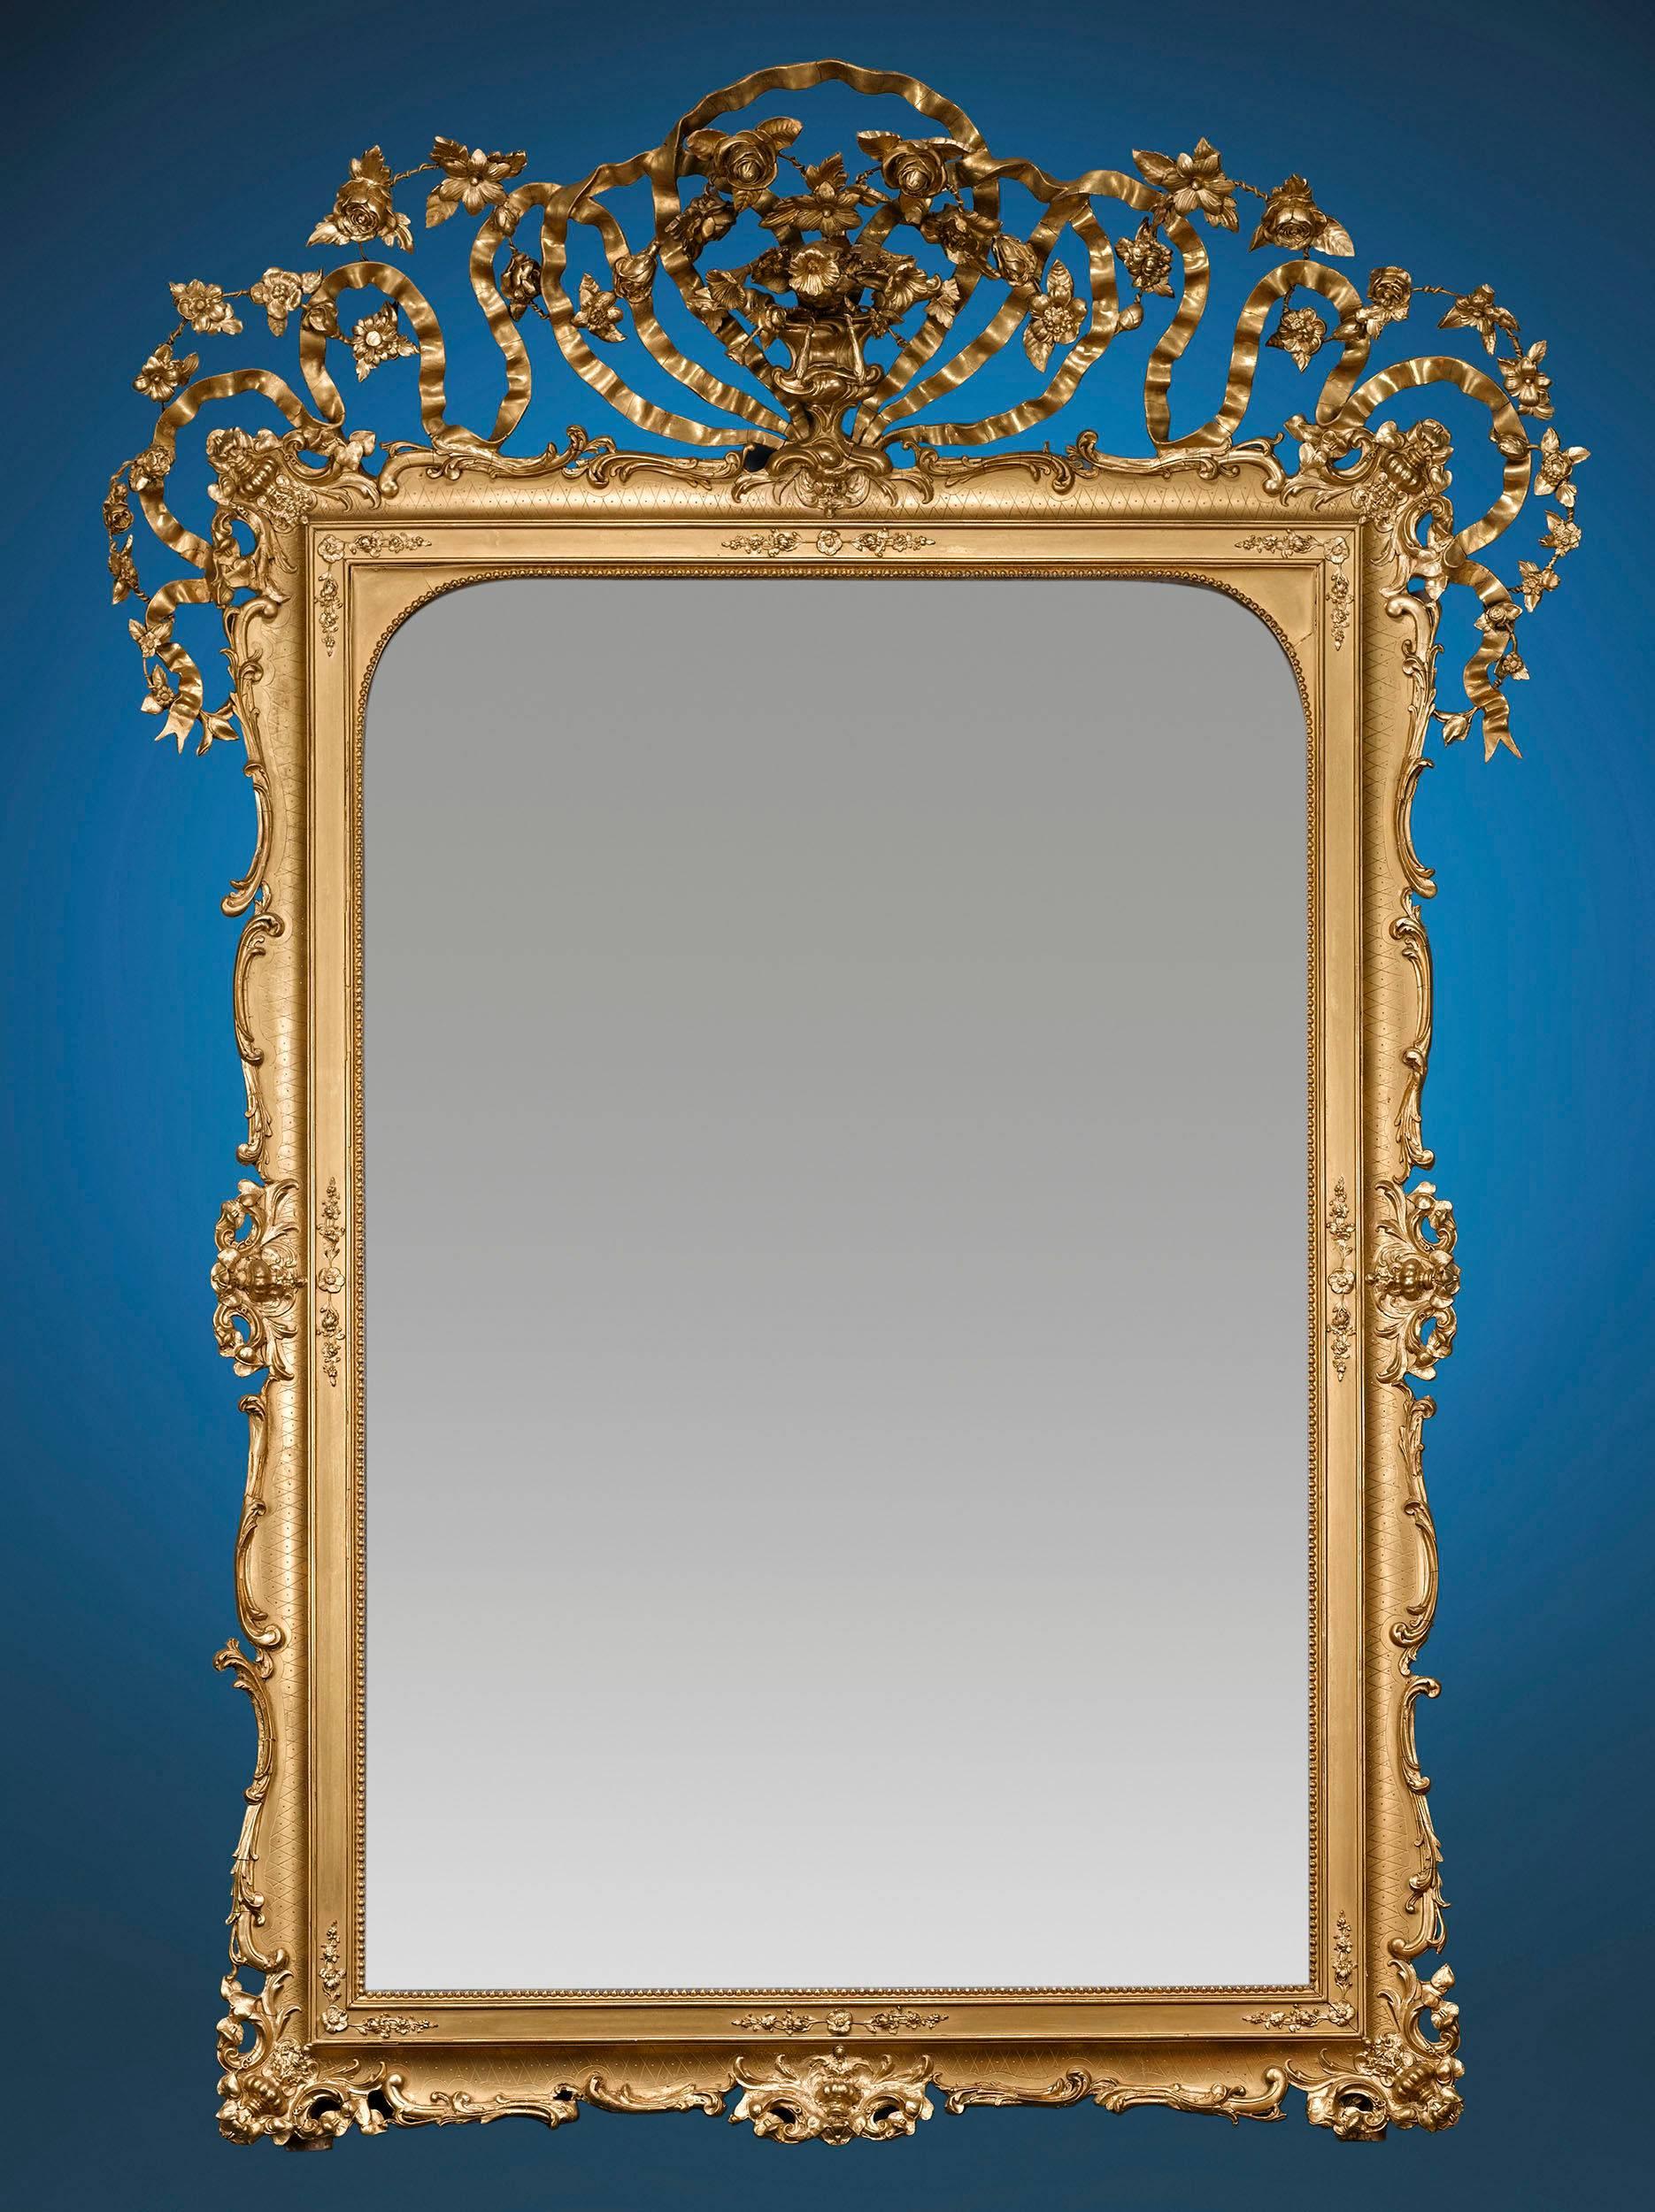 Grand size and elaborately hand-carved frames set these exceptional Napoleon III-period mirrors apart. The rare pair feature their original gilding and intricate floral elements inspired by classical design. From their magnificent size to their